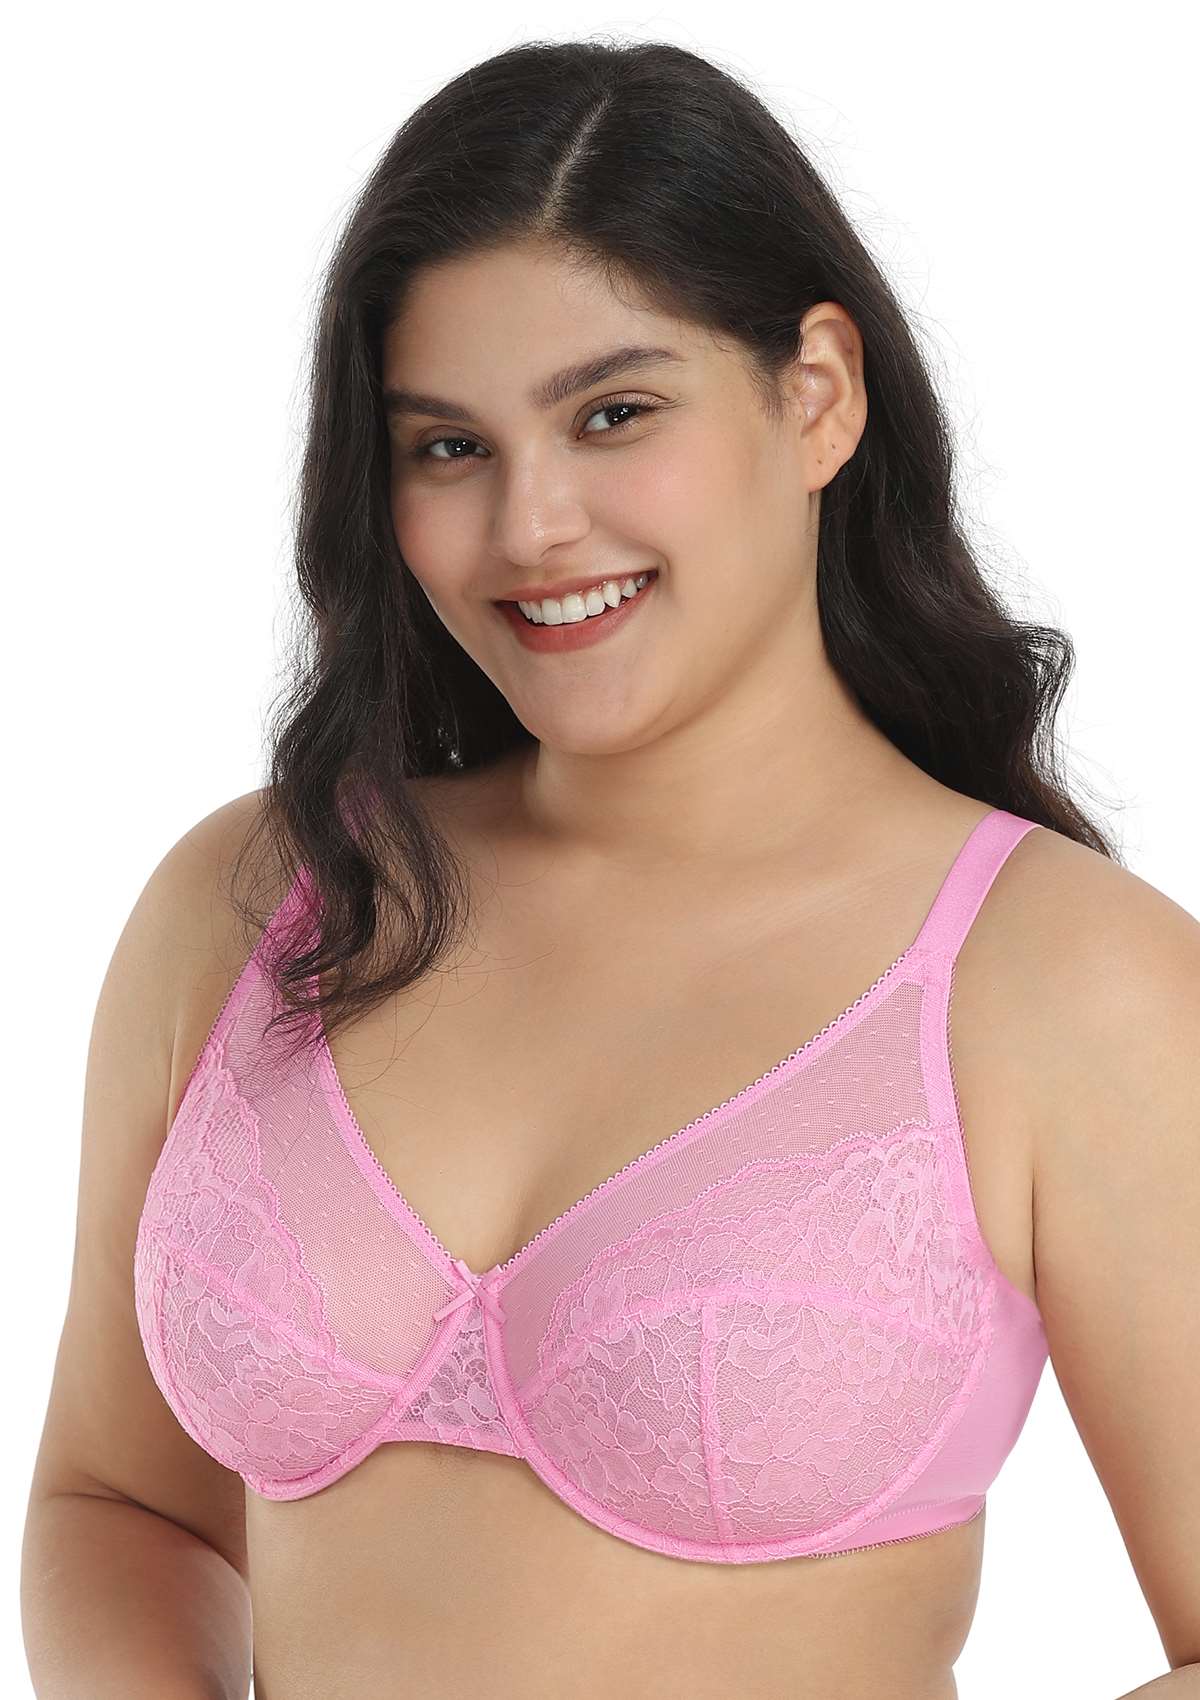 HSIA Enchante Lacy Bra: Comfy Sheer Lace Bra With Lift - Pink / 36 / I